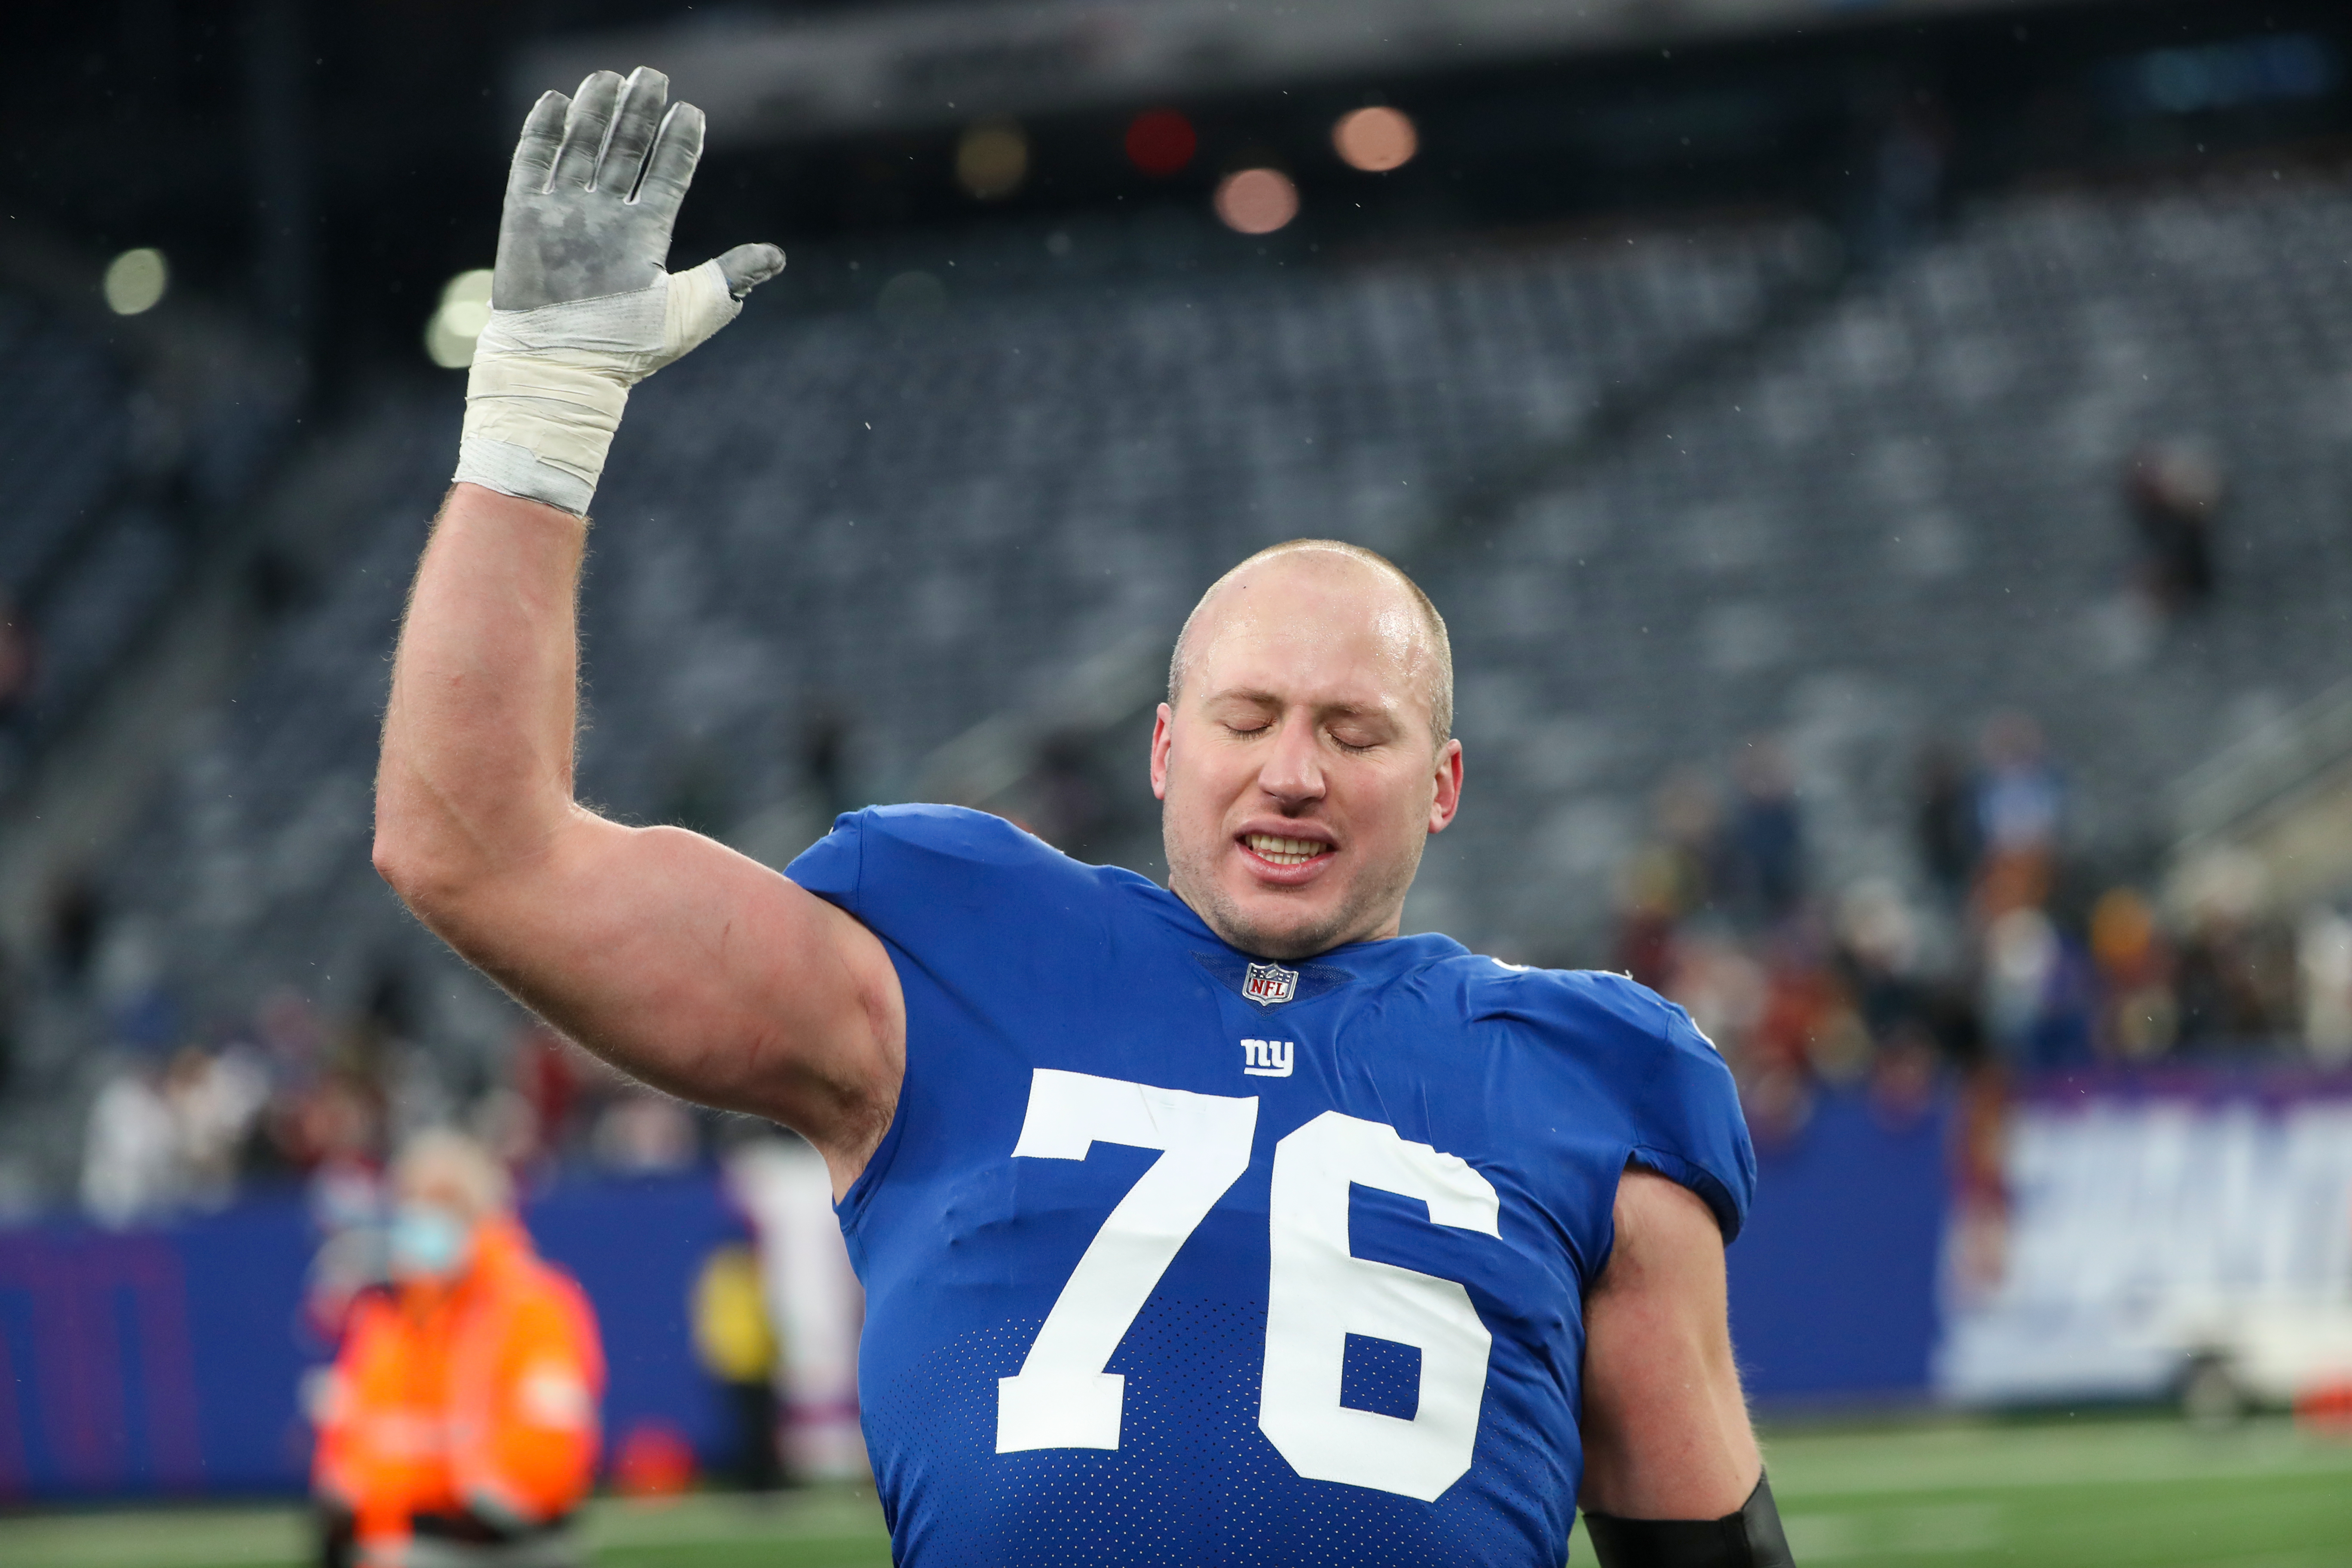 New York Giants offensive tackle Nate Solder (76) becomes emotional as he walks off the field after the Giants lost to Washington Football Team, 22-7, on Sunday, Jan. 9, 2022 in East Rutherford, N.J.